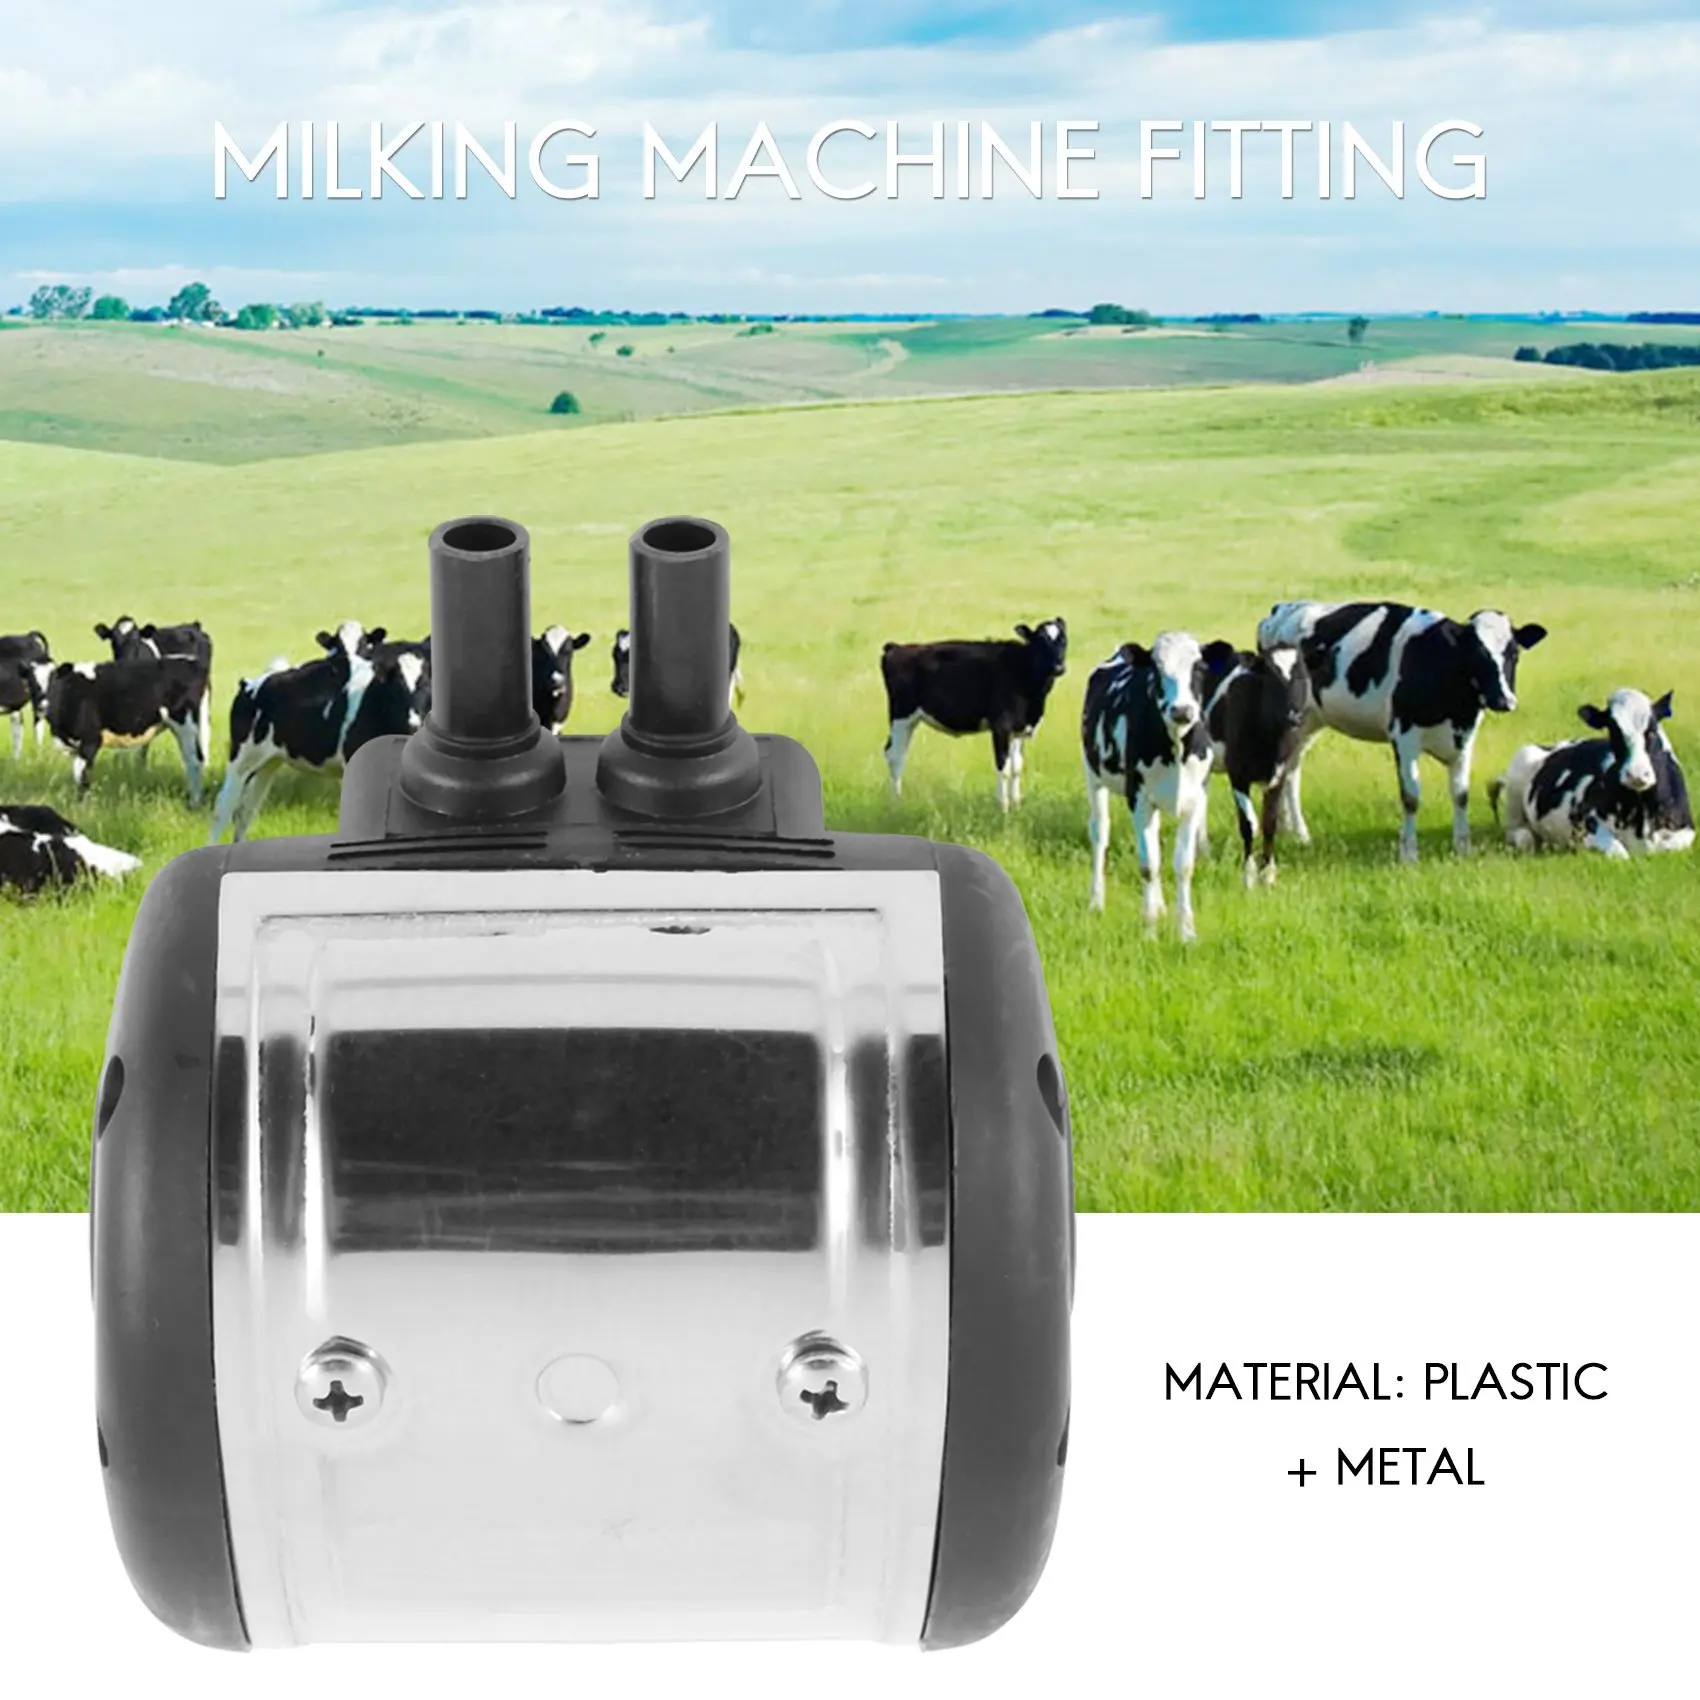 

NEW L80 Pnewmatic Pulsator for Cow Milker Milking Machine Fitting Dairy Farm Milker